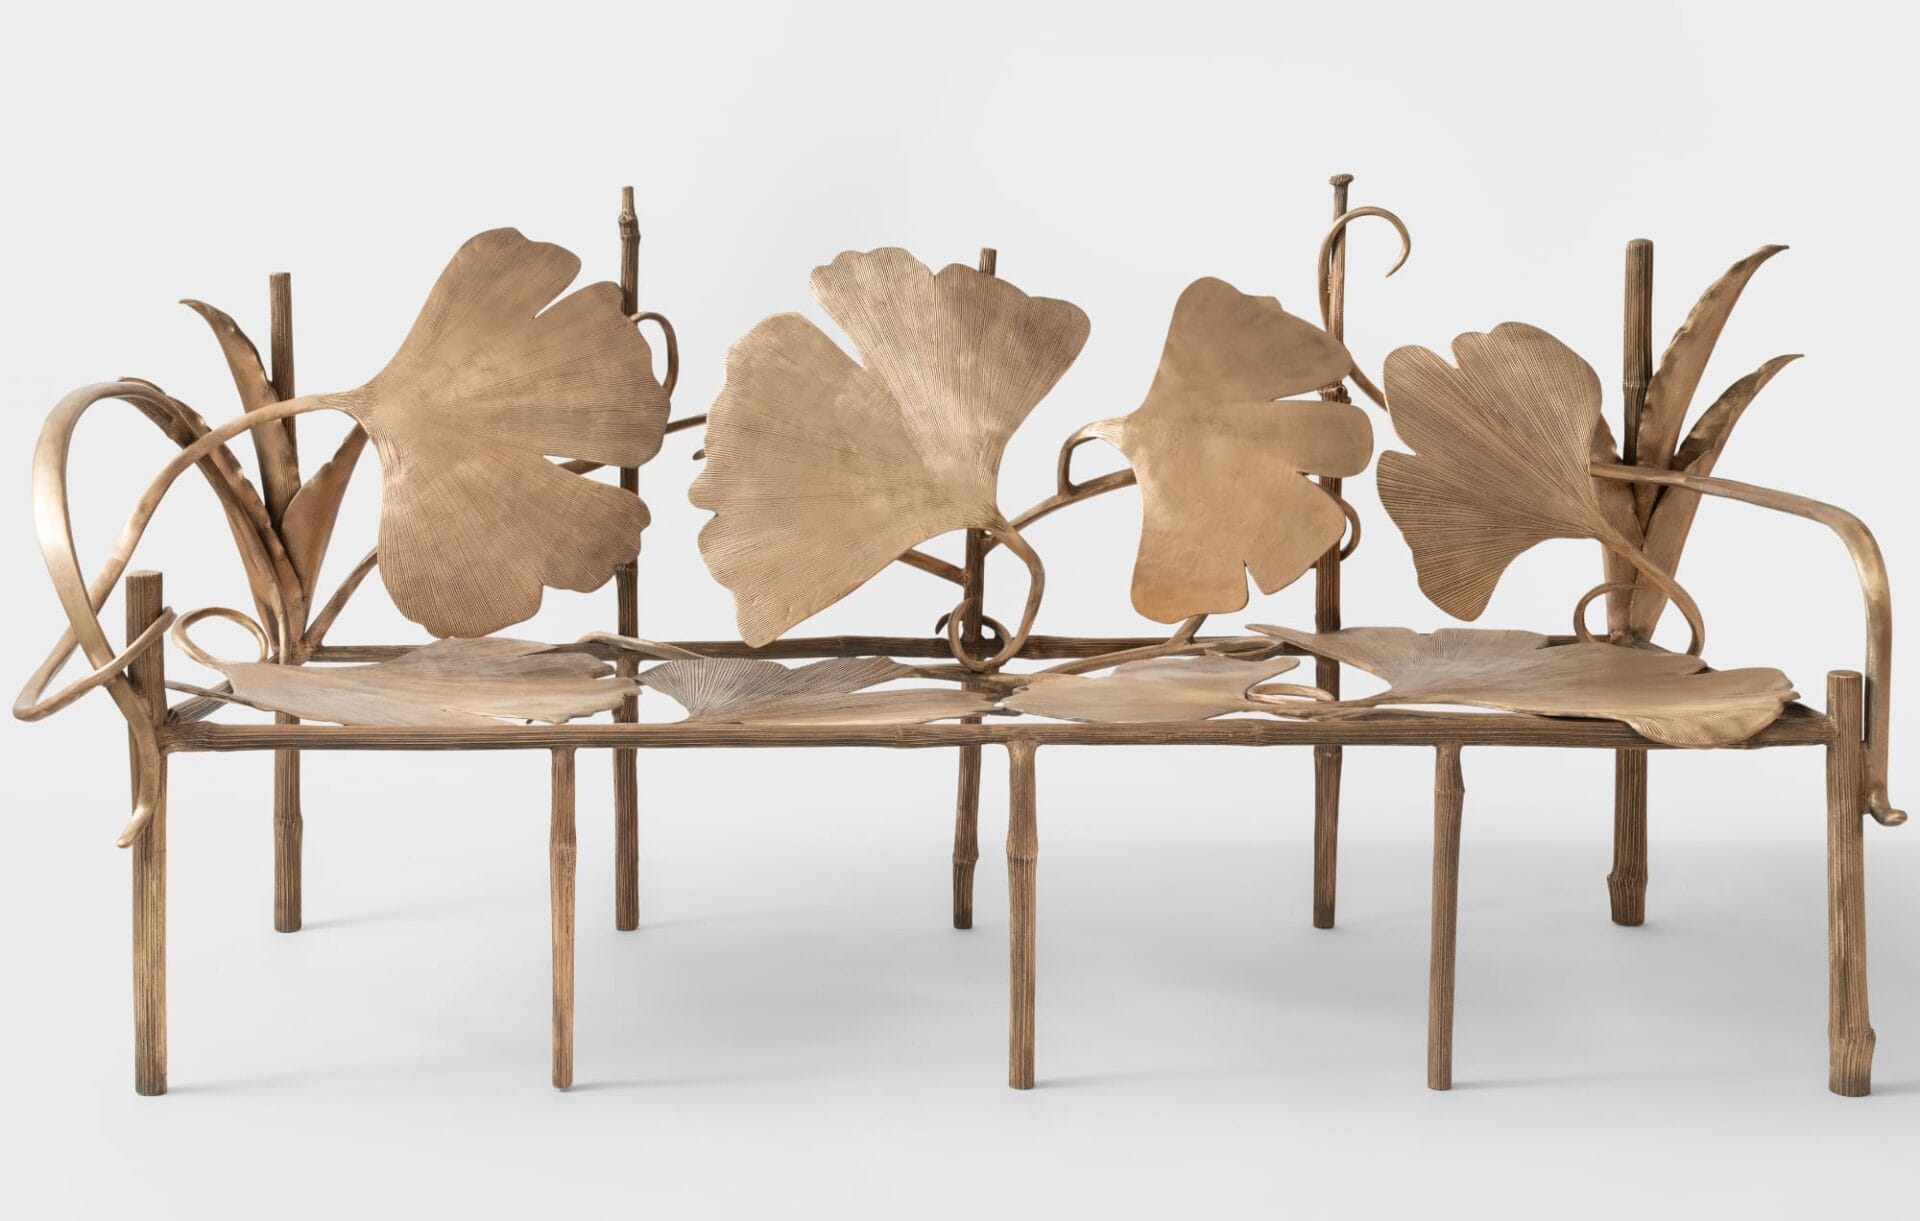 a bronze bench made of gingko leaves